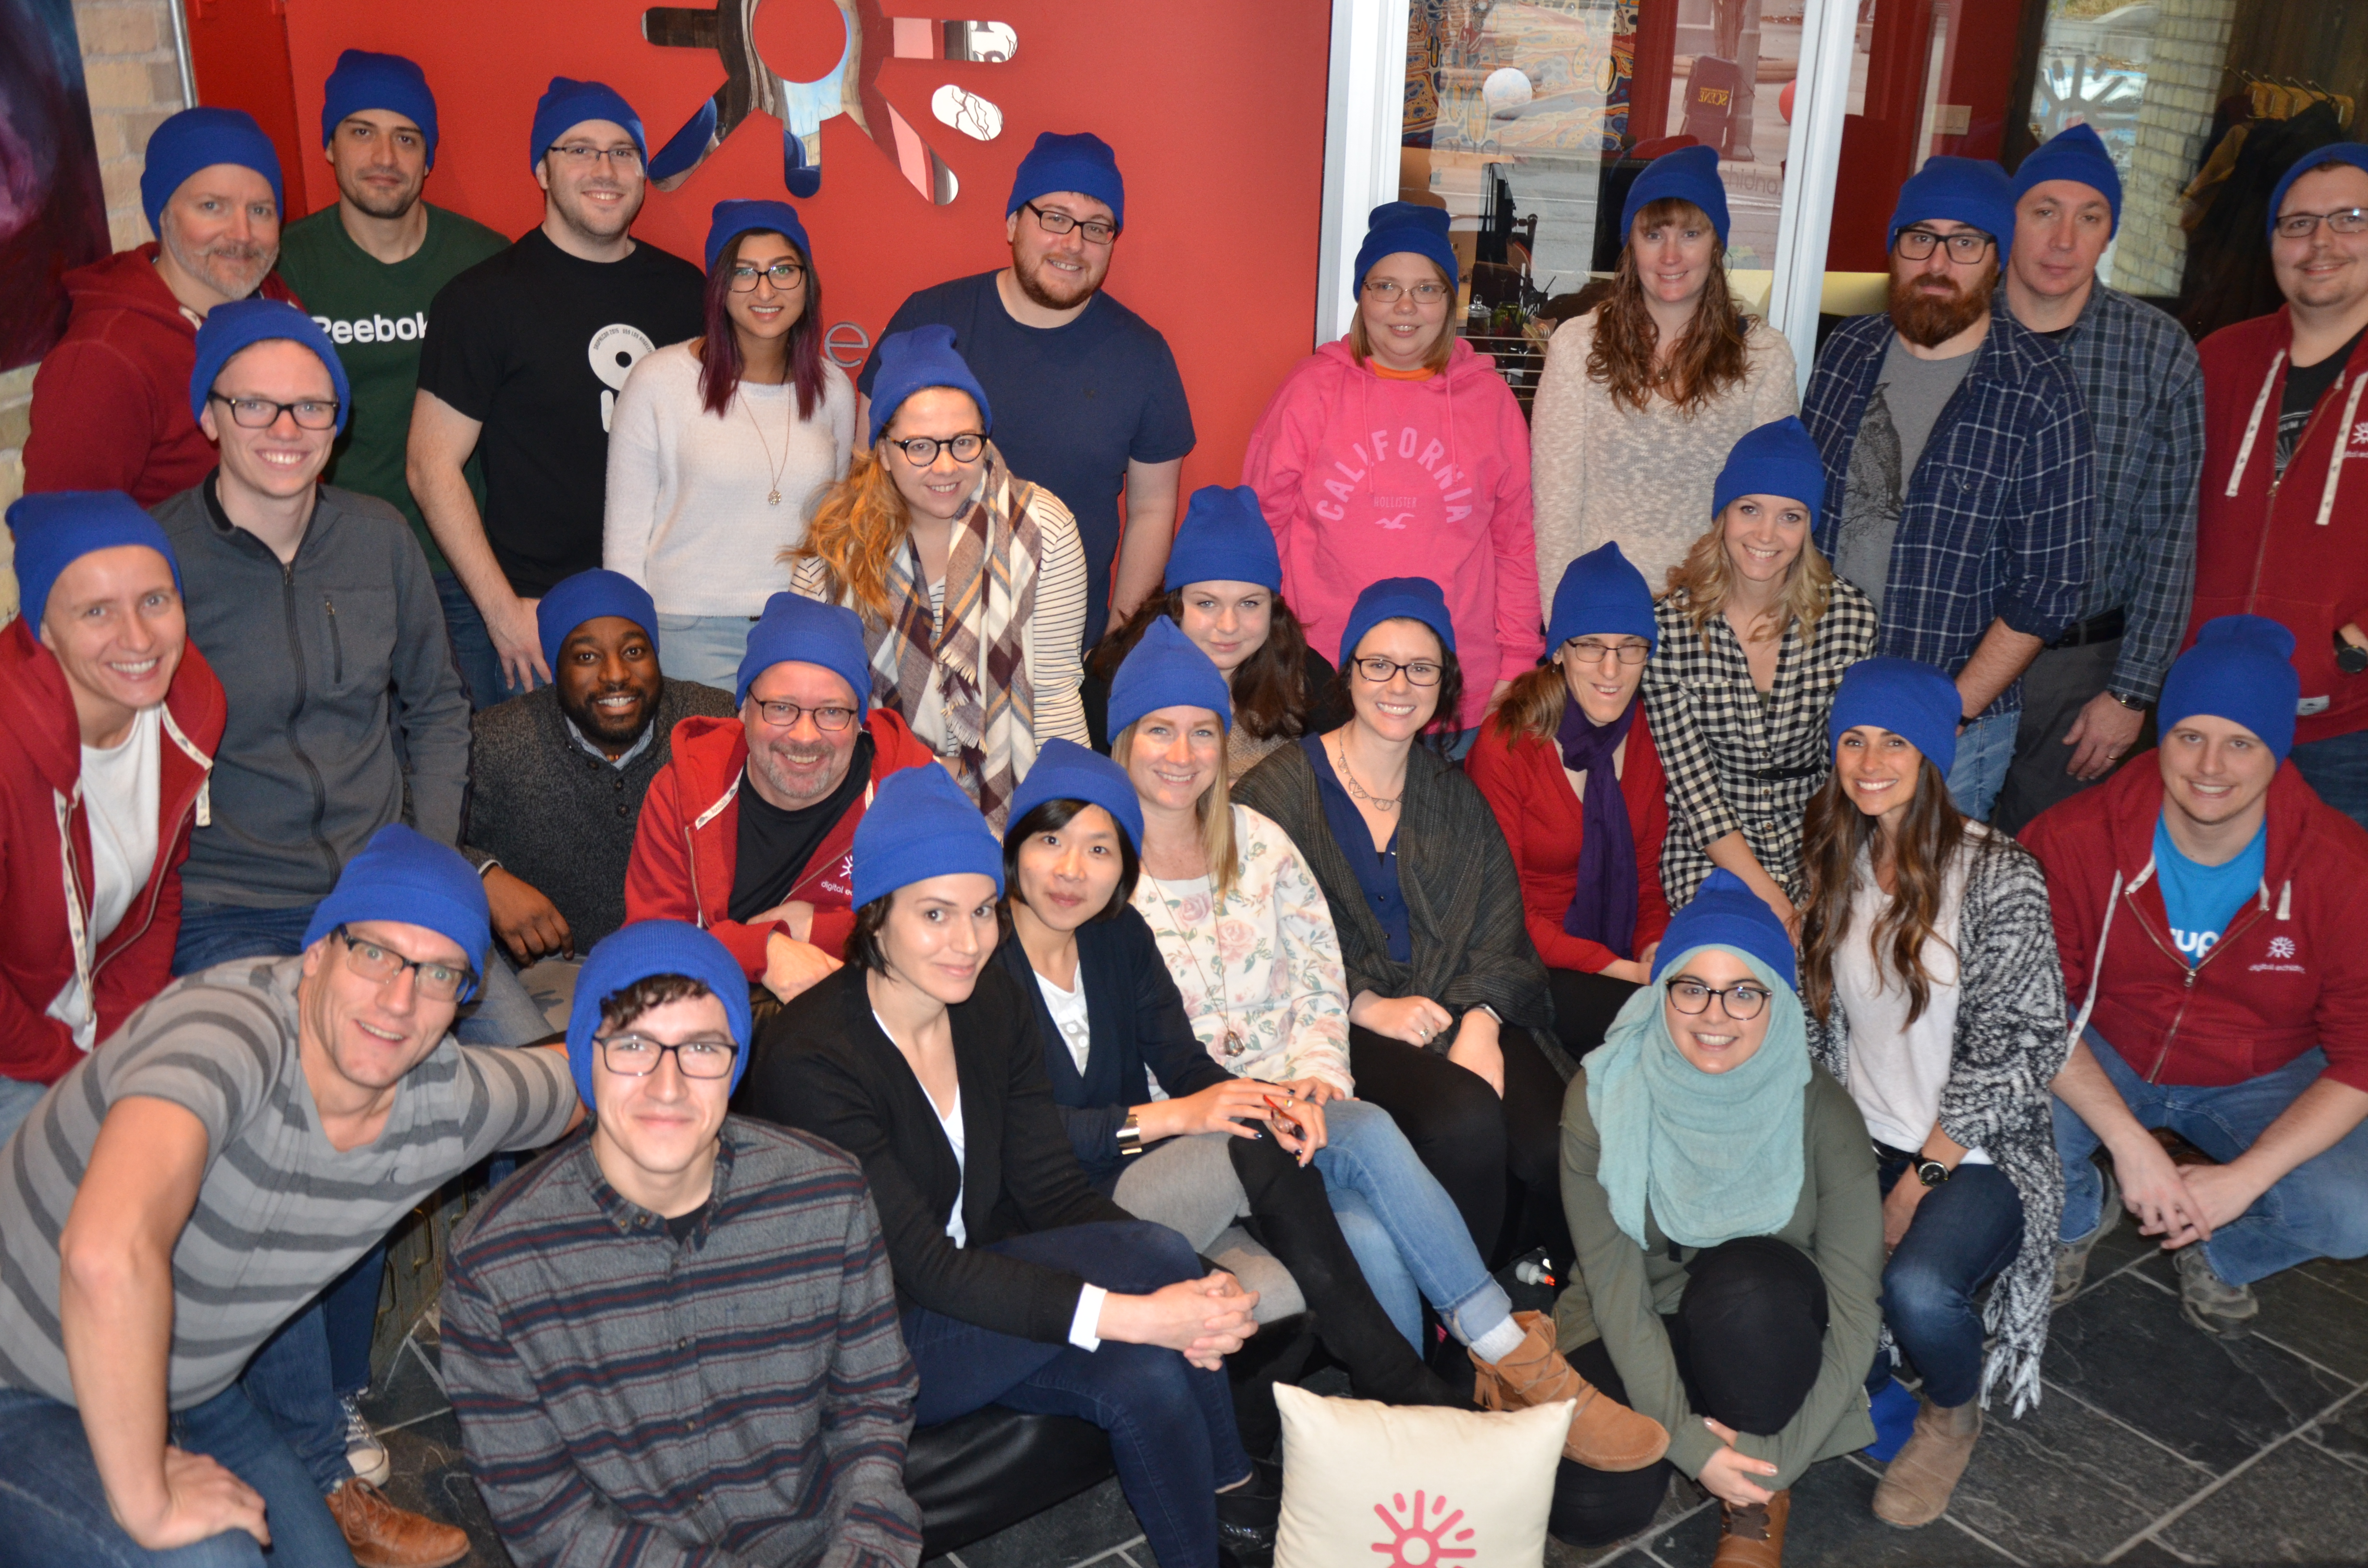 Some of the Digital Echidna team, wearing blue beanies in support of Blue Beanie Day